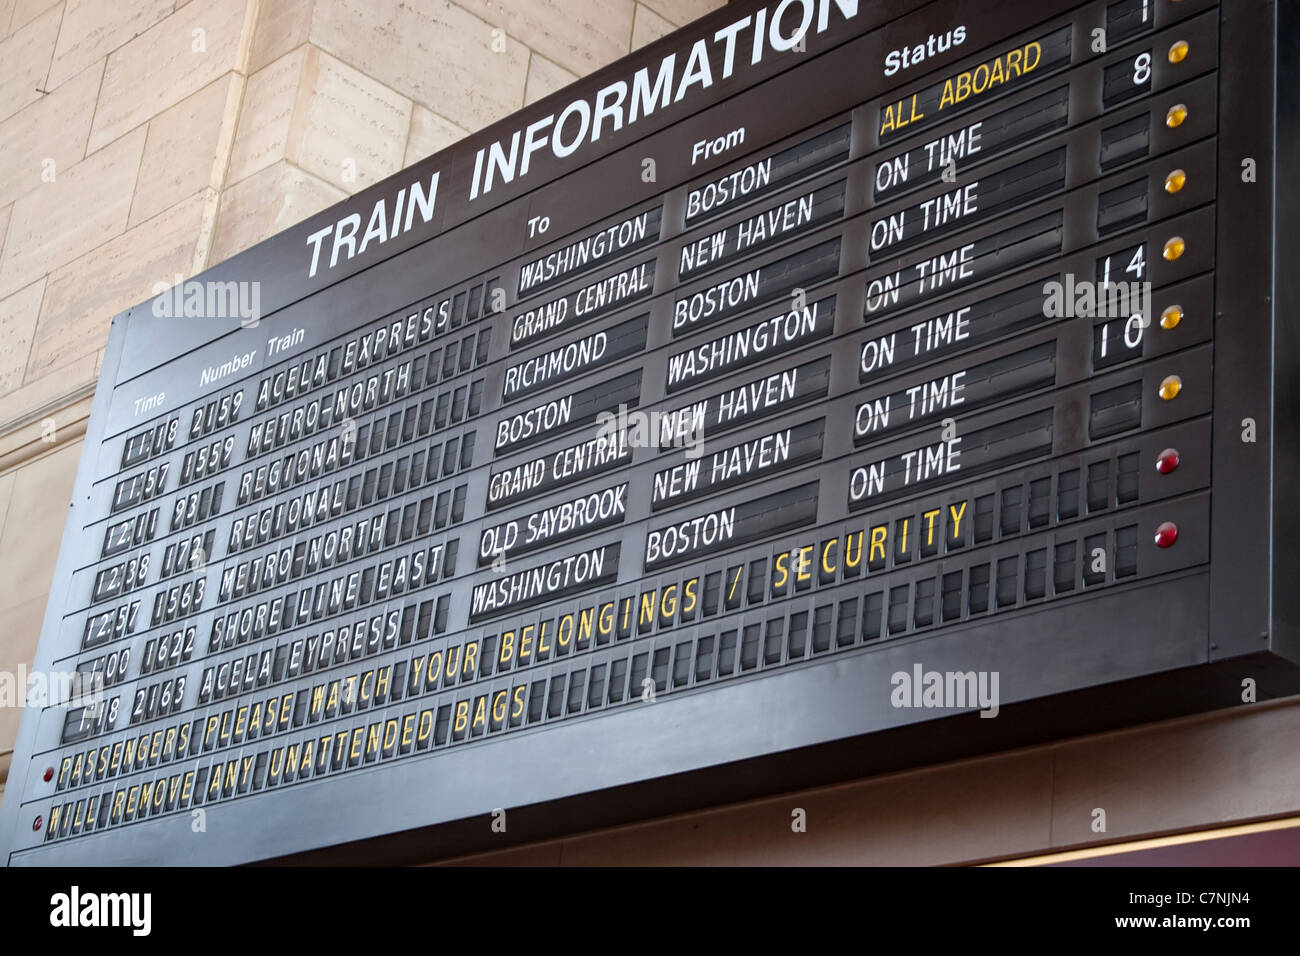 A schedule board in a train station with information telling the time and destinations for travelers. Stock Photo